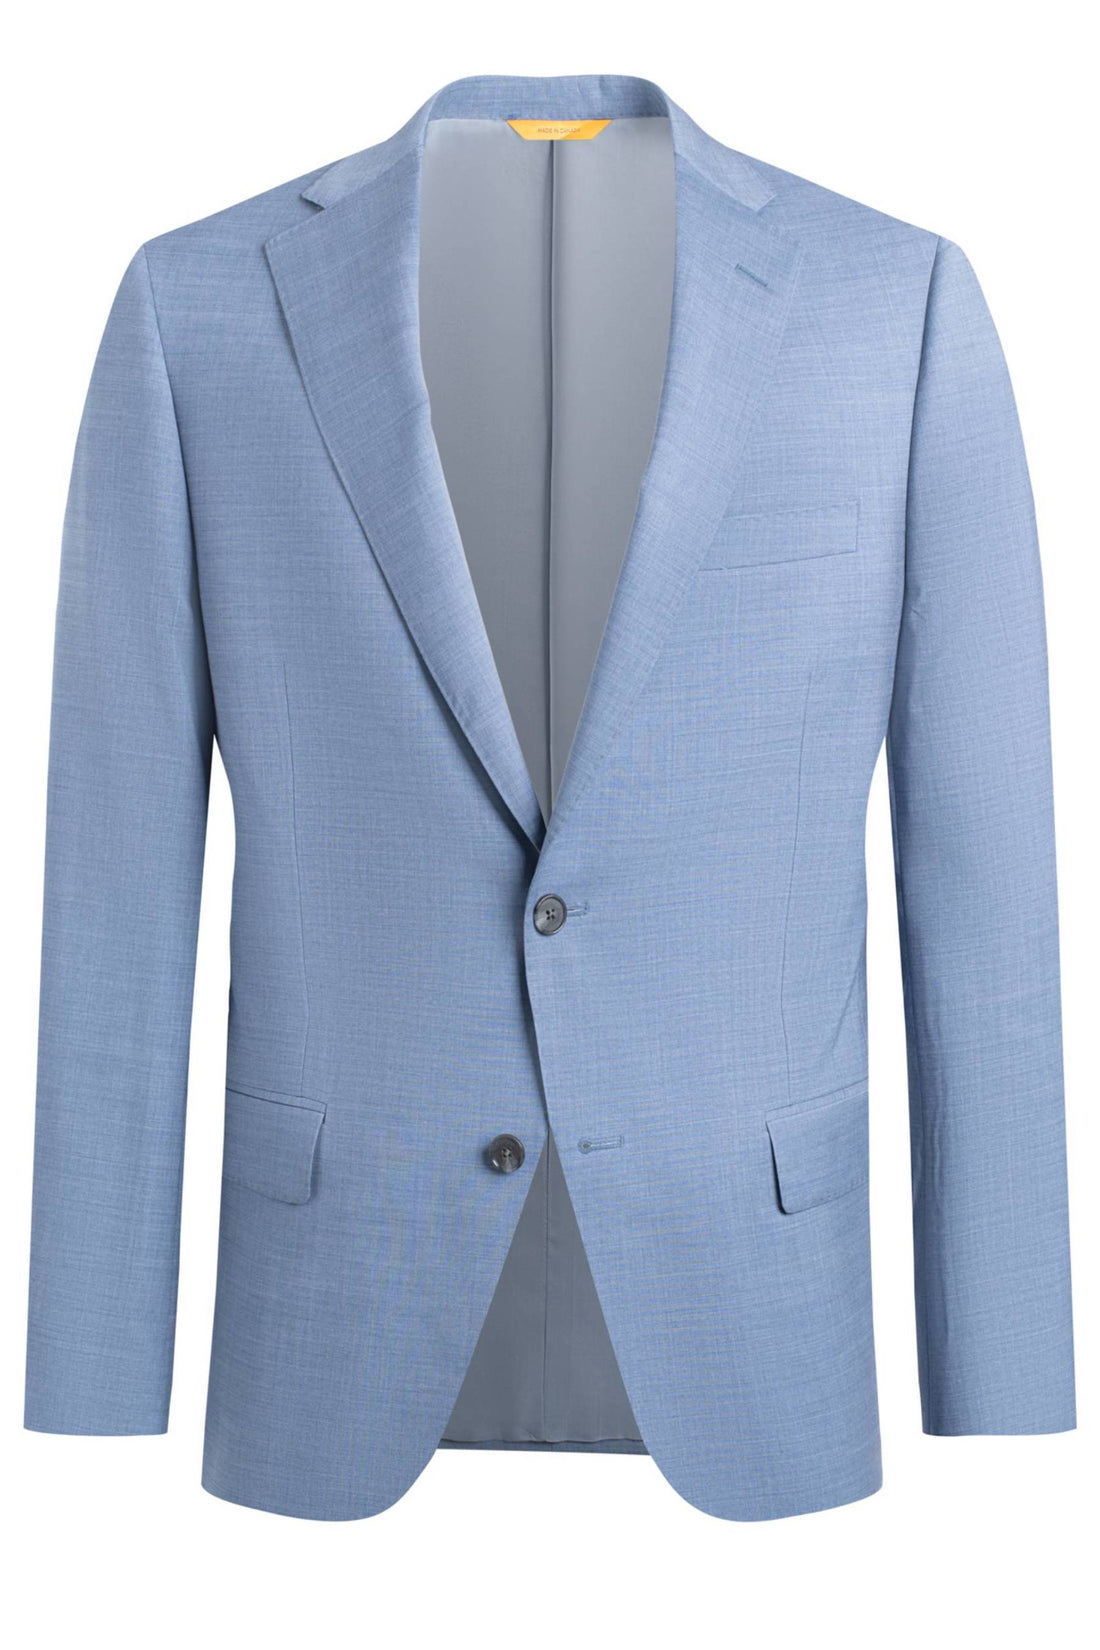 Heritage Gold Light Blue Tropical Wool Suit front jacket